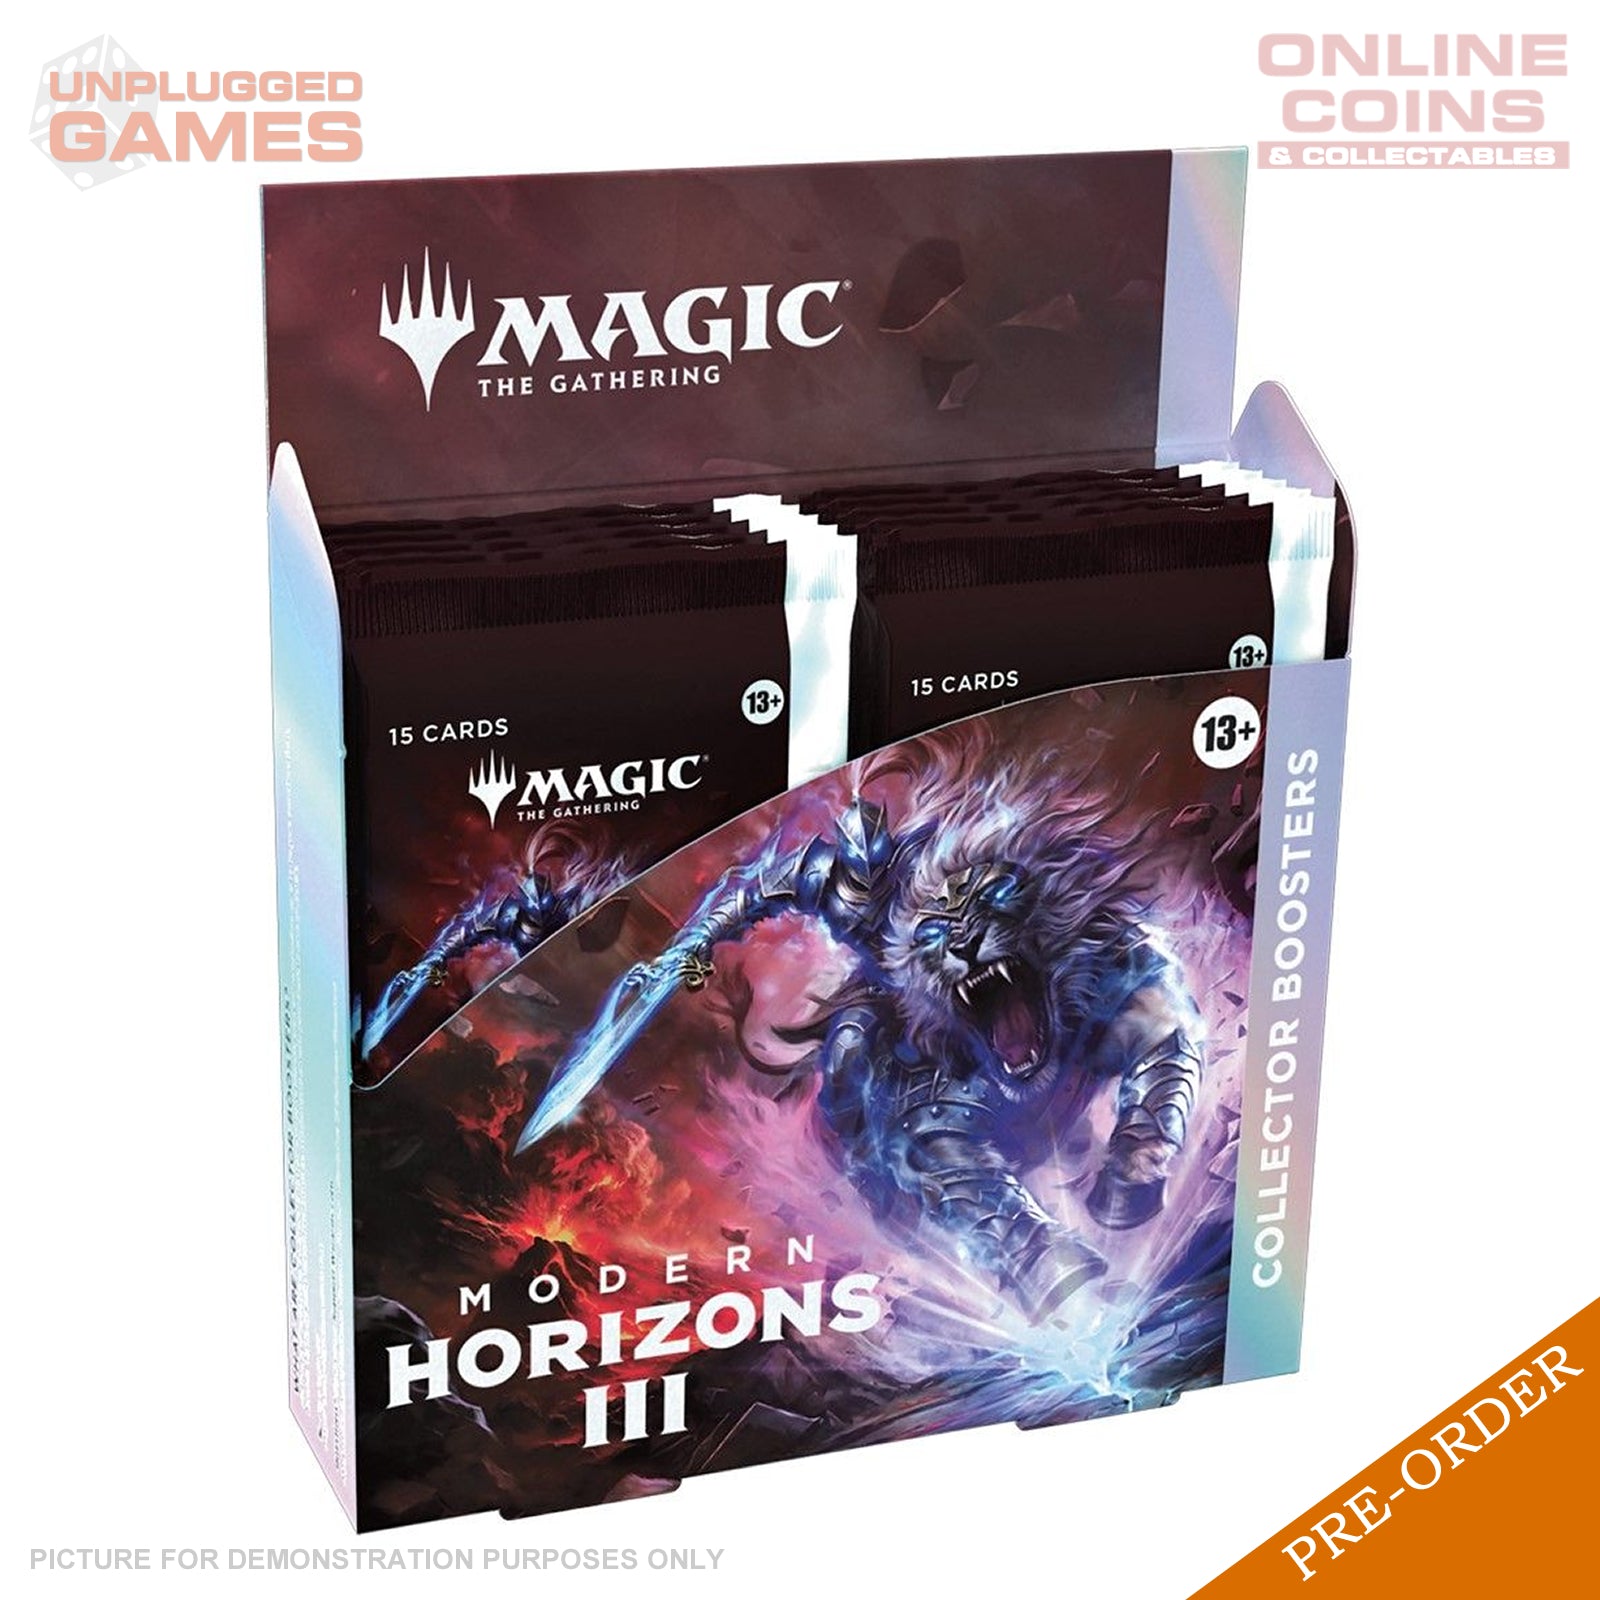 Magic the Gathering - Modern Horizons 3 - Collector Booster Box - 12 Packs - PRE-ORDER